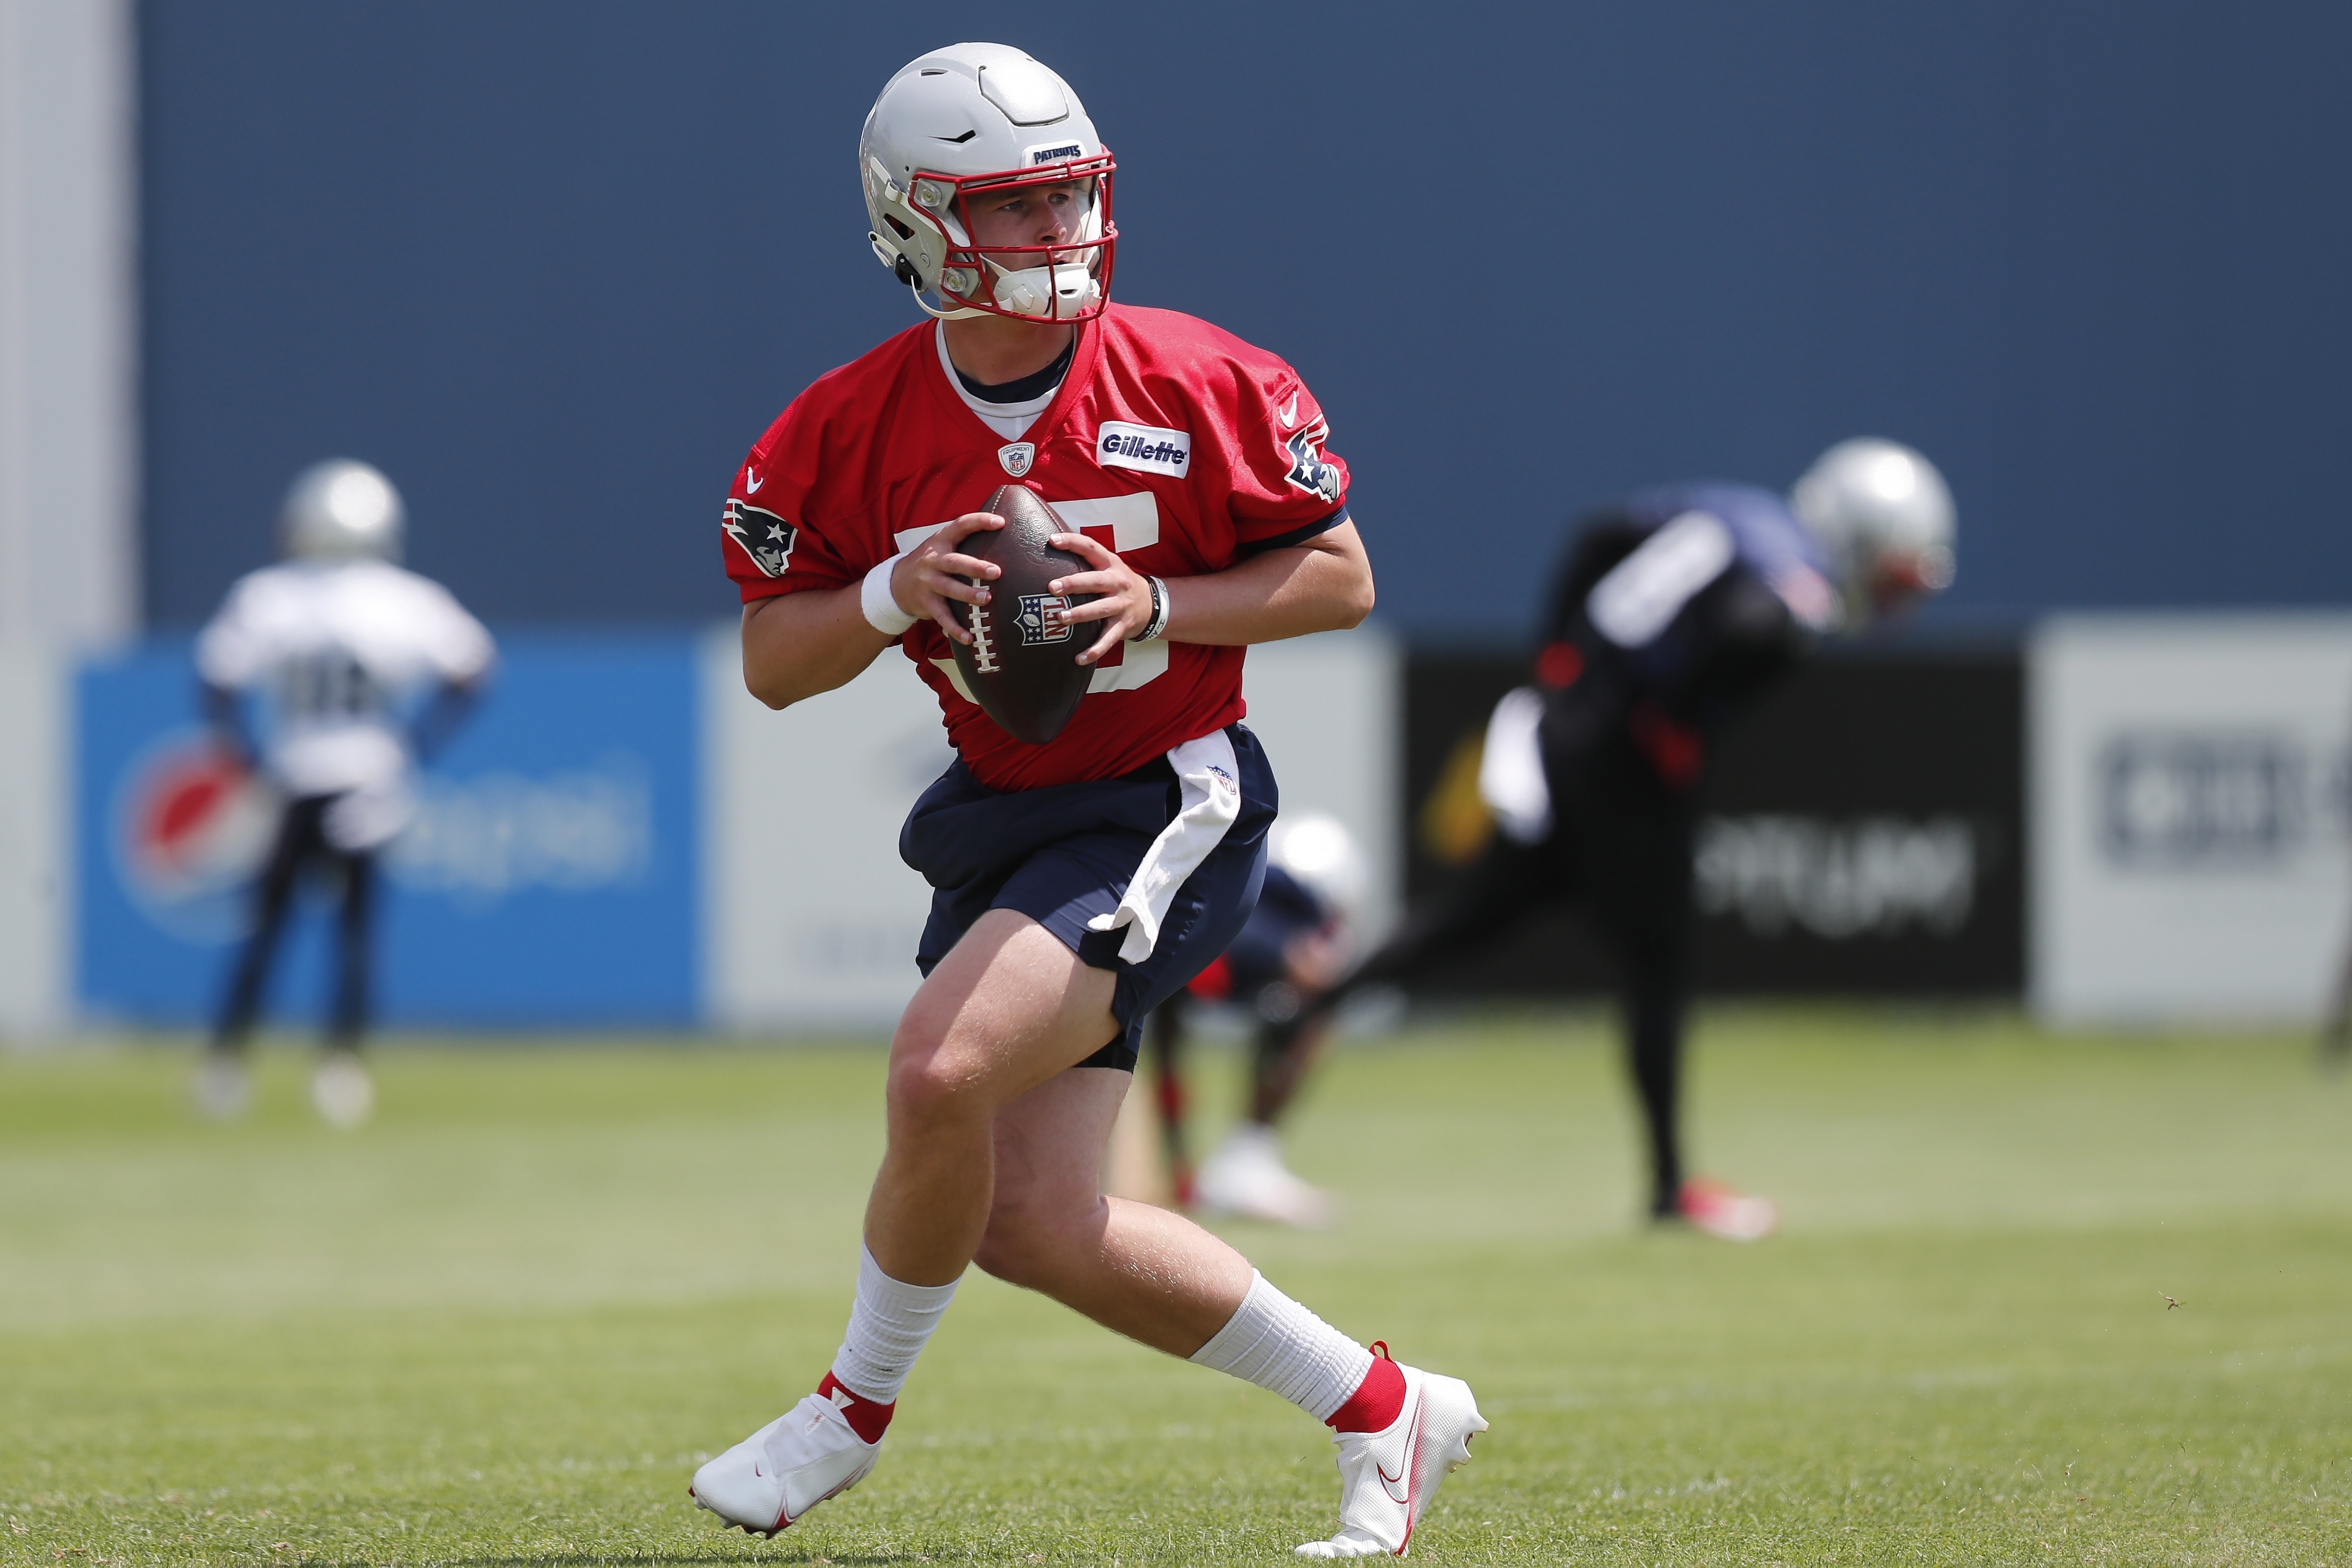 With Mac Jones injured, will Bailey Zappe get a chance as Patriots QB?  (Mailbag) 